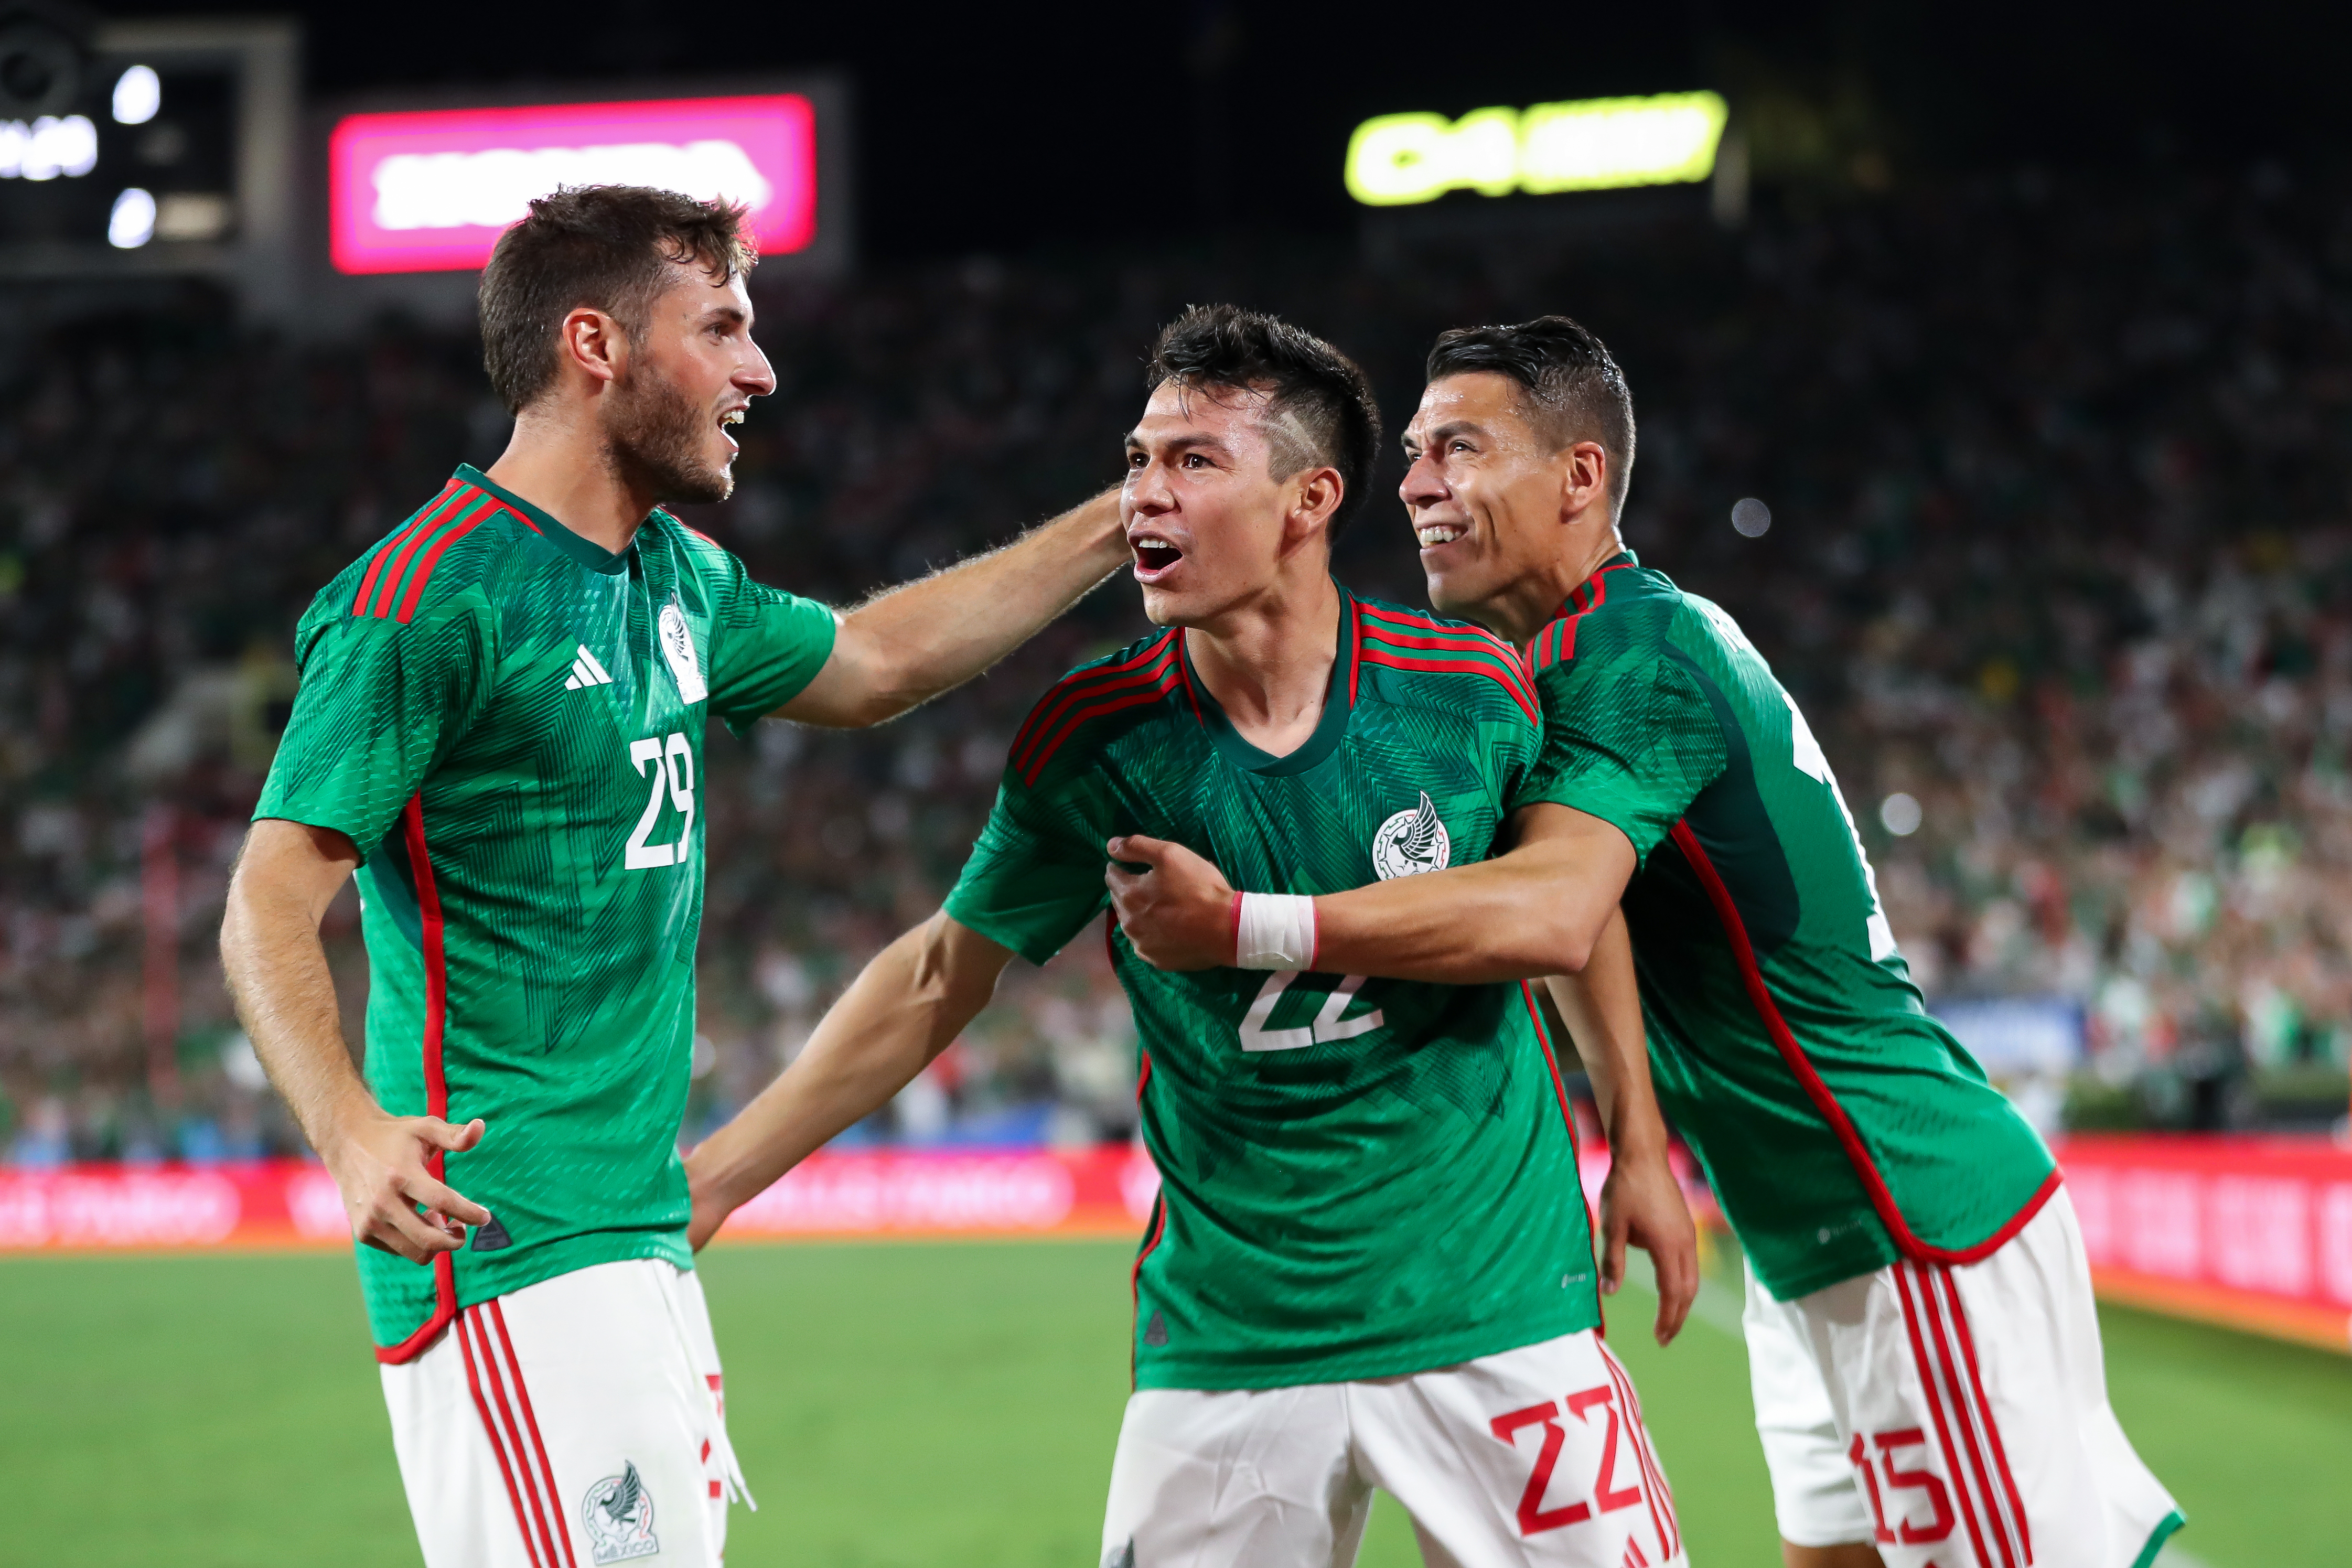 PASADENA, CA - SEPTEMBER 24: Hirving Lozano #22 of Mexico celebrates with his teammates after scoring his team's first goal during the friendly match between Mexico and Peru at Rose Bowl on September 24, 2022 in Pasadena, California. (Photo by Omar Vega/Getty Images)